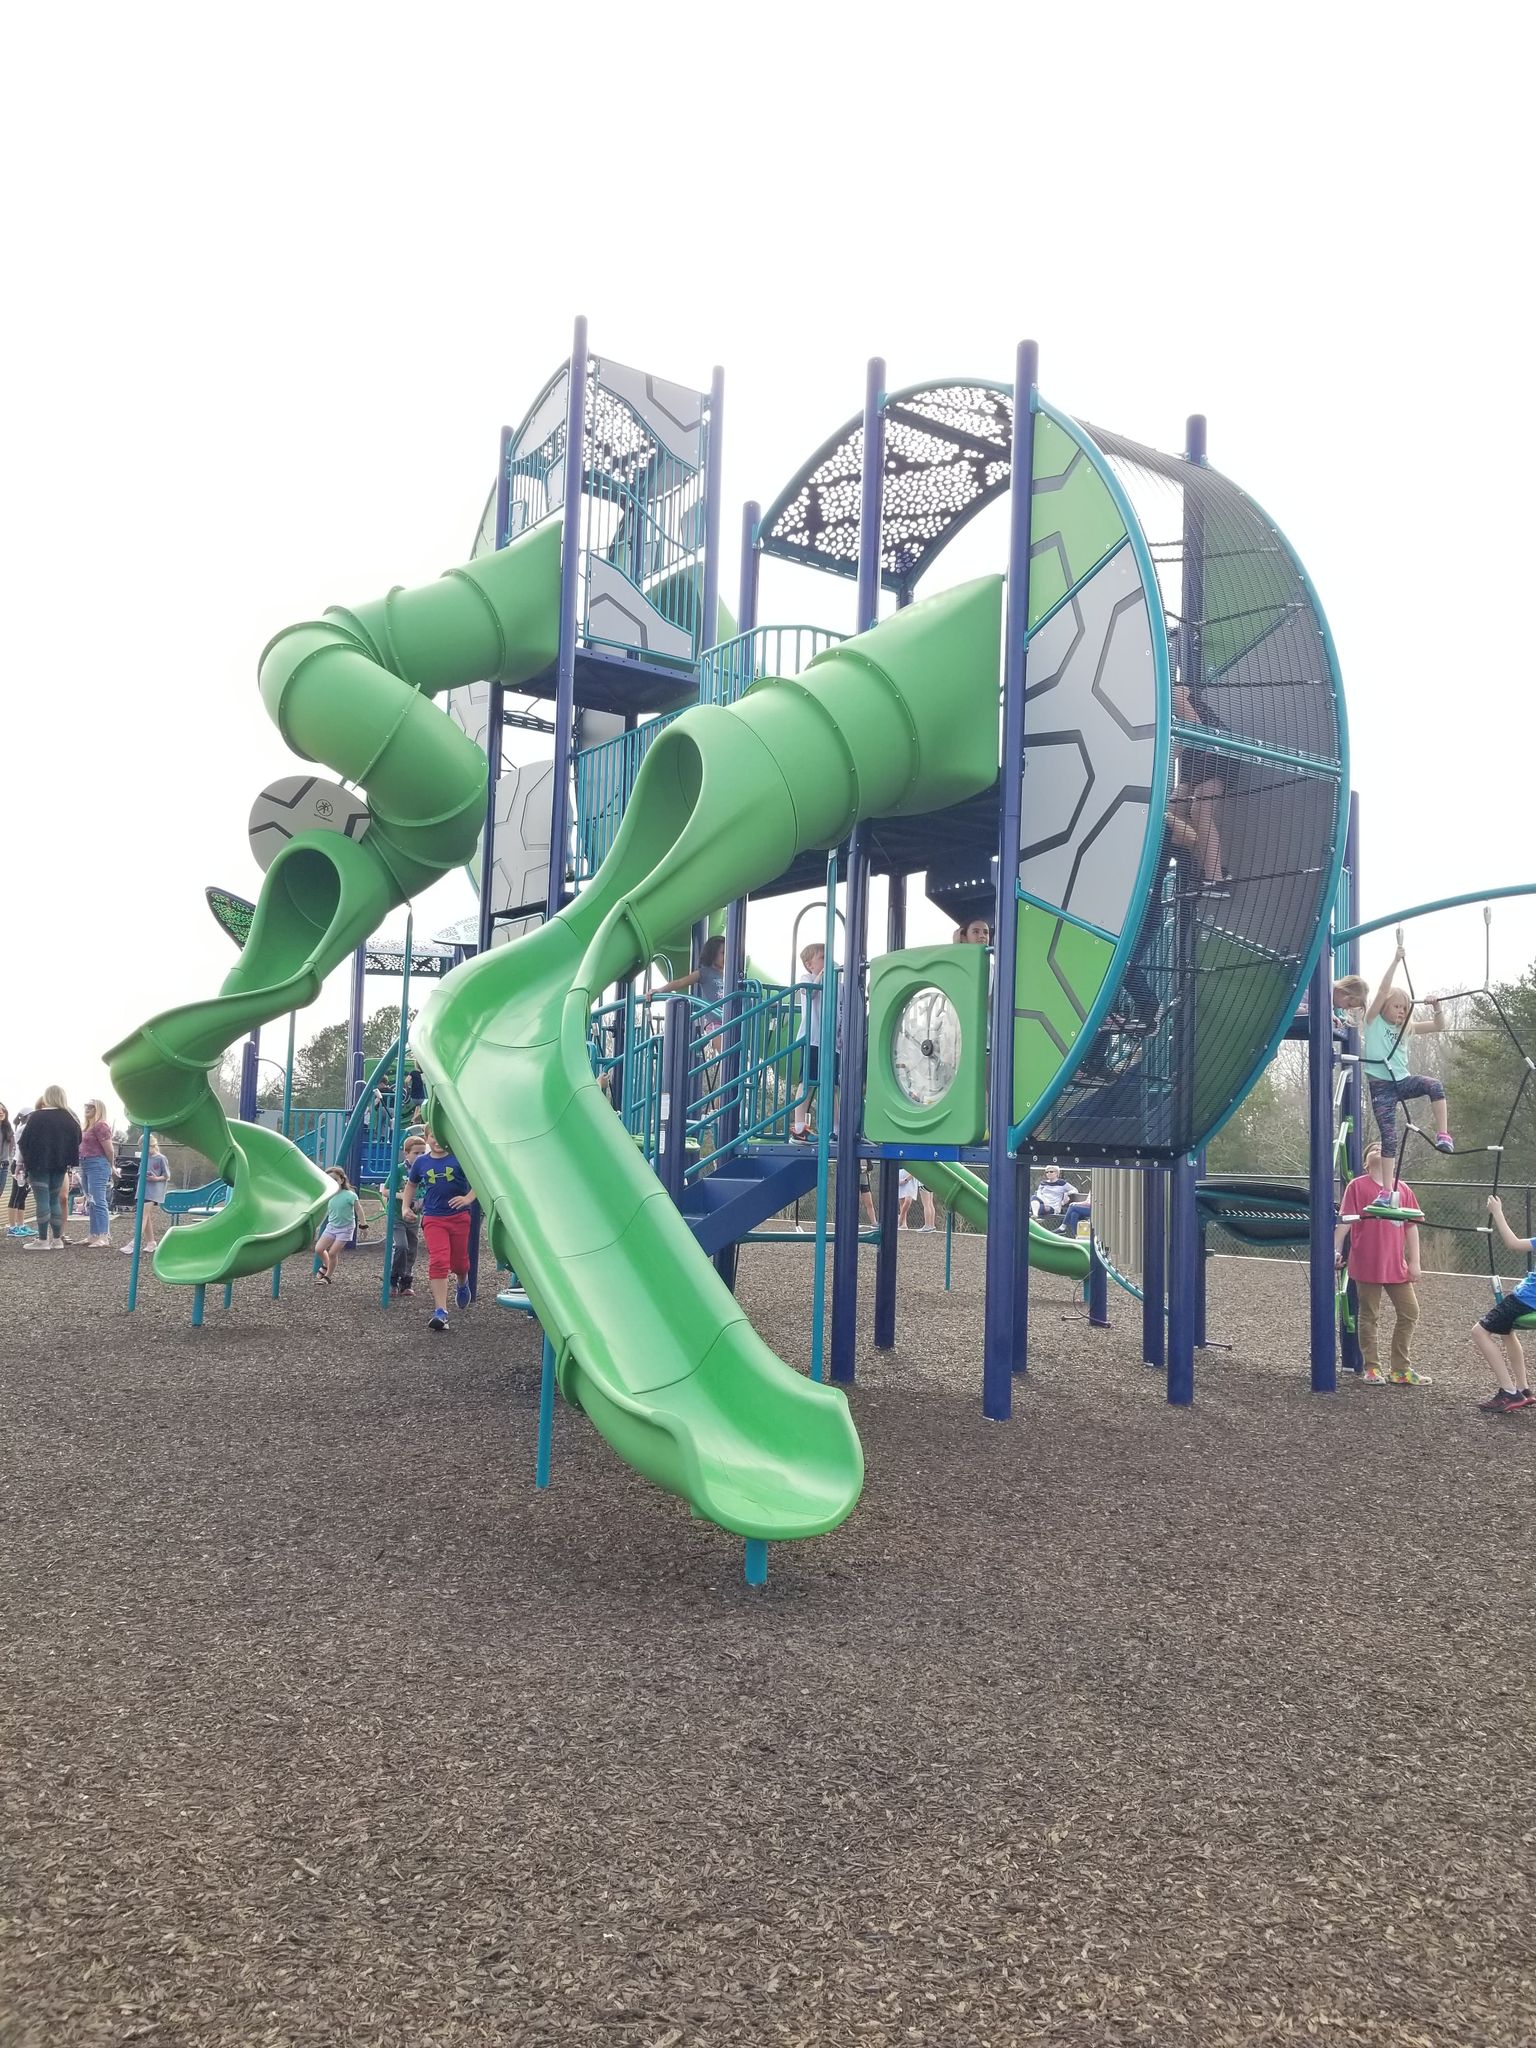 SouthPark Mall Attracts Families with Big Outdoor Playground